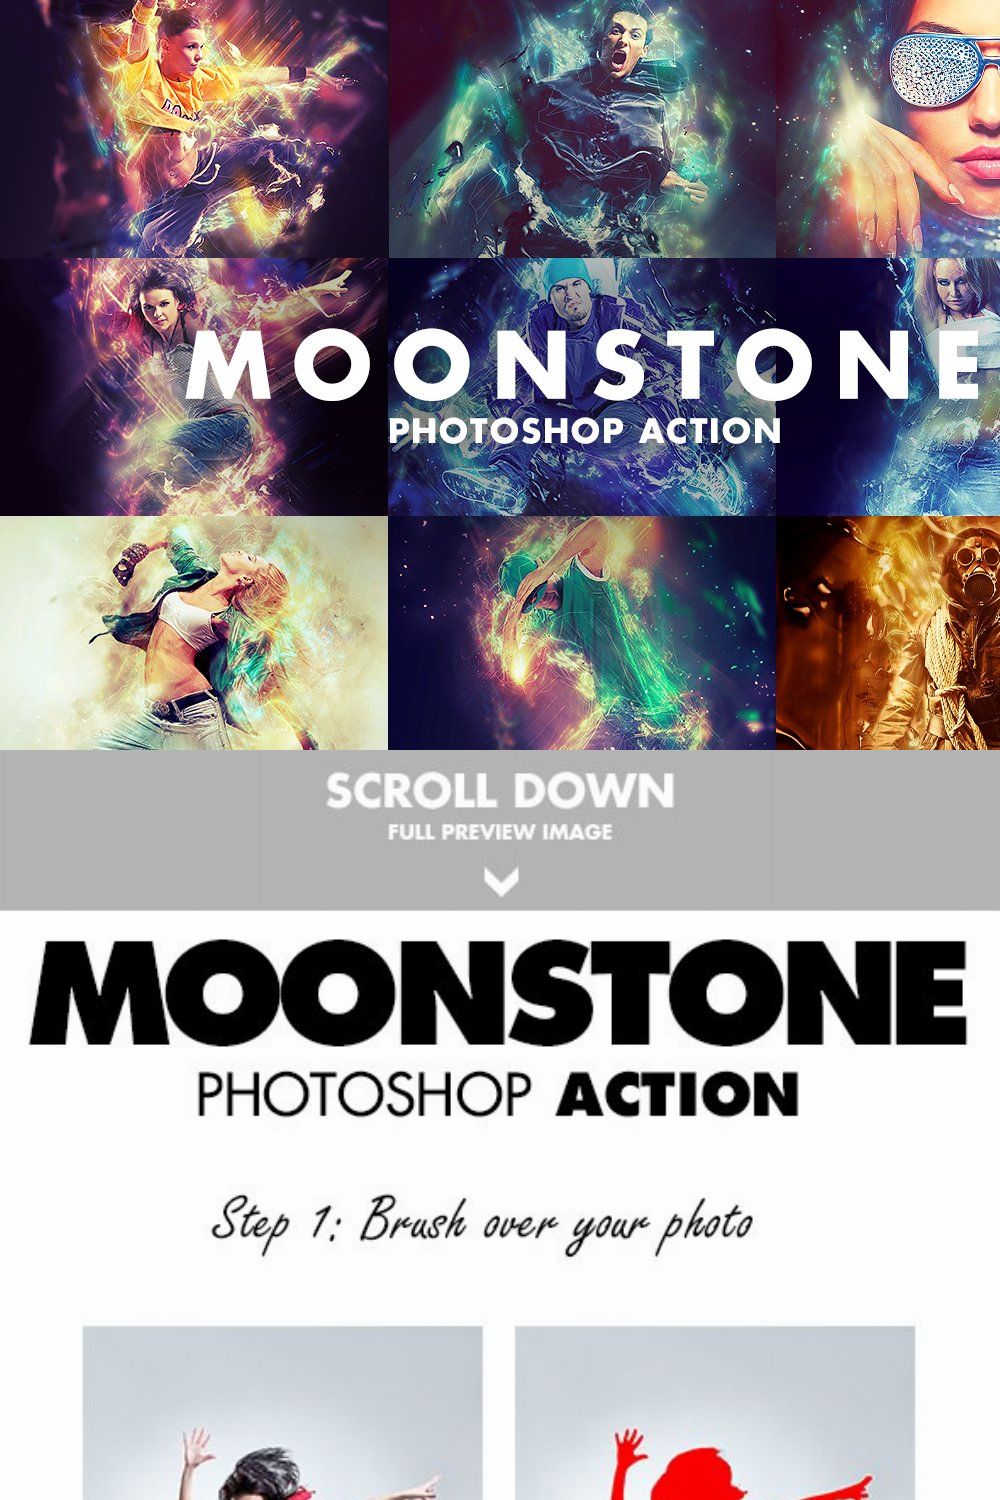 Moonstone Photoshop Action pinterest preview image.